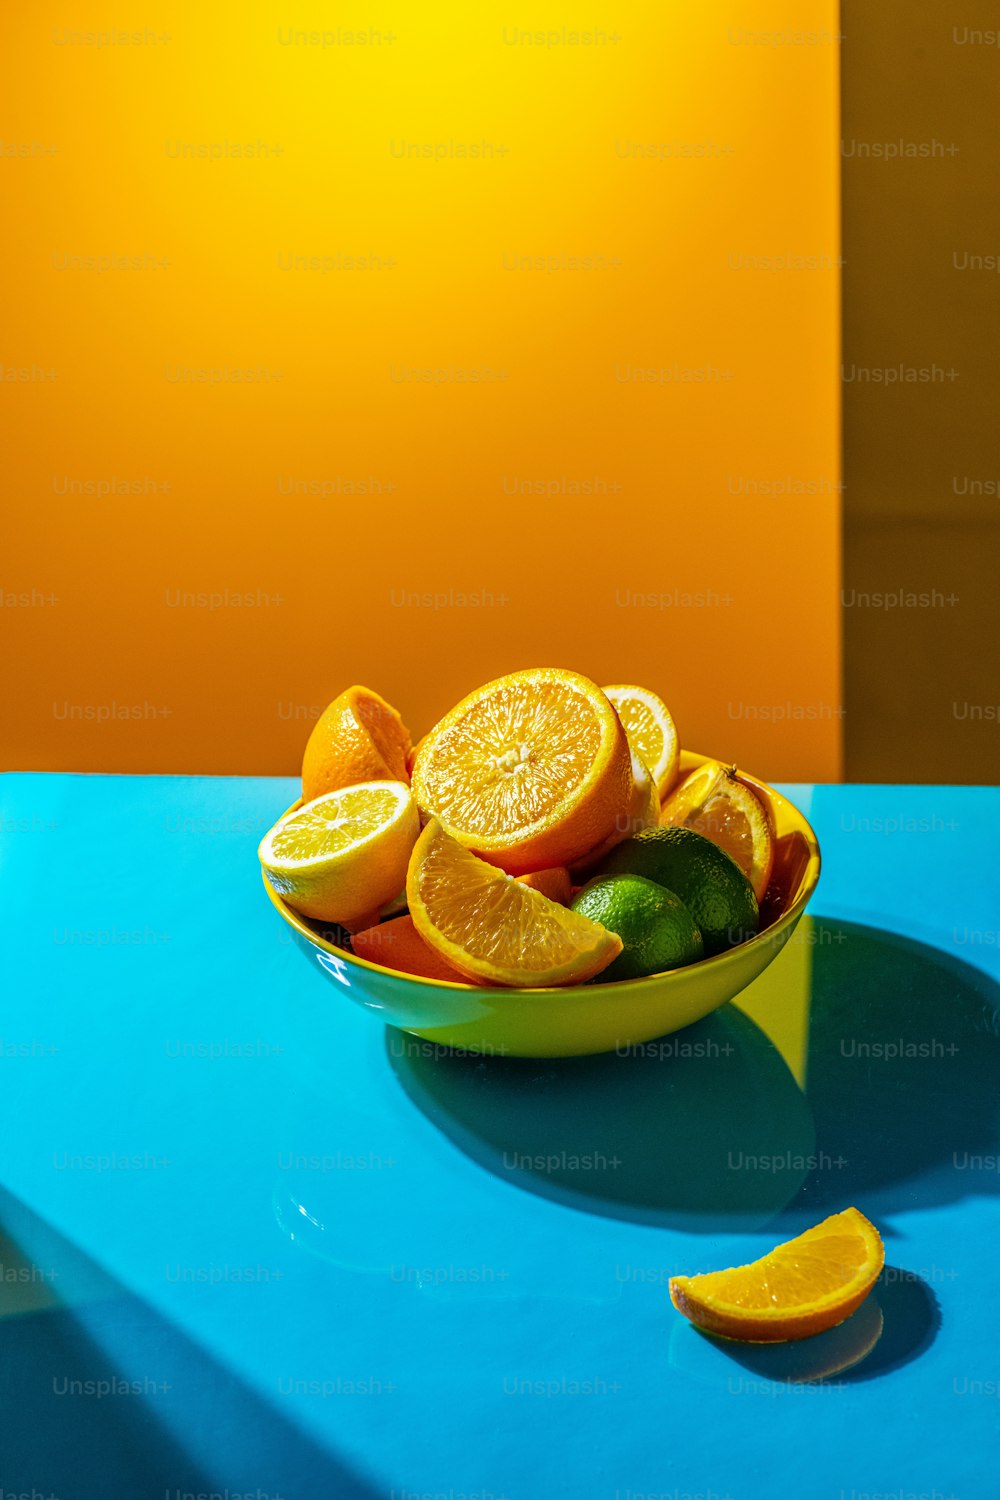 a bowl of oranges and limes on a blue table